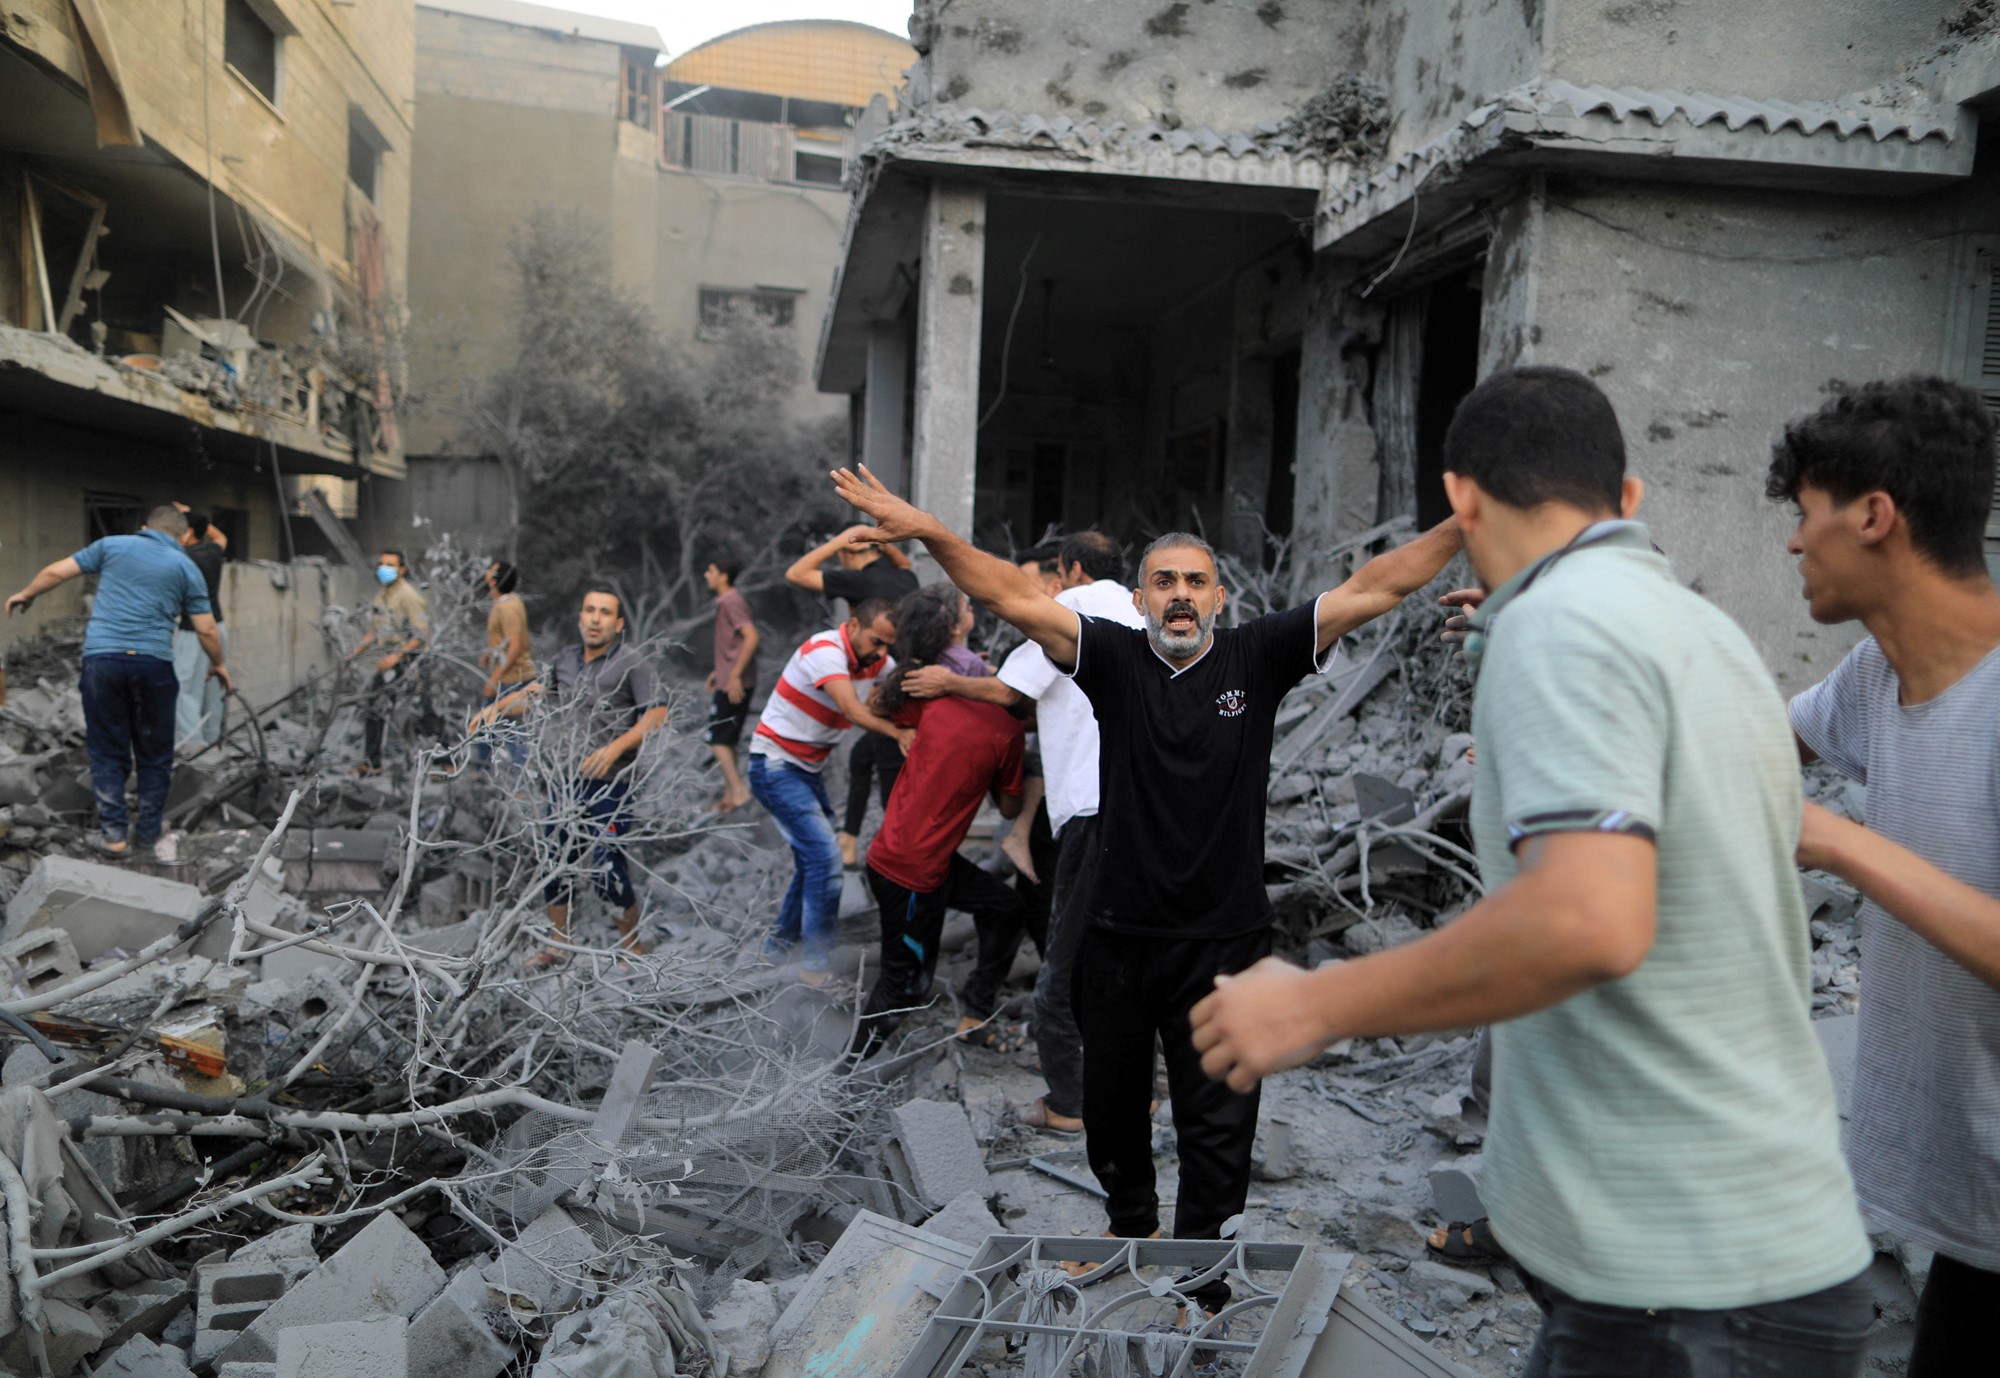 A man stands with arms outstretched as a crowd behind him dig through the rubble of a house